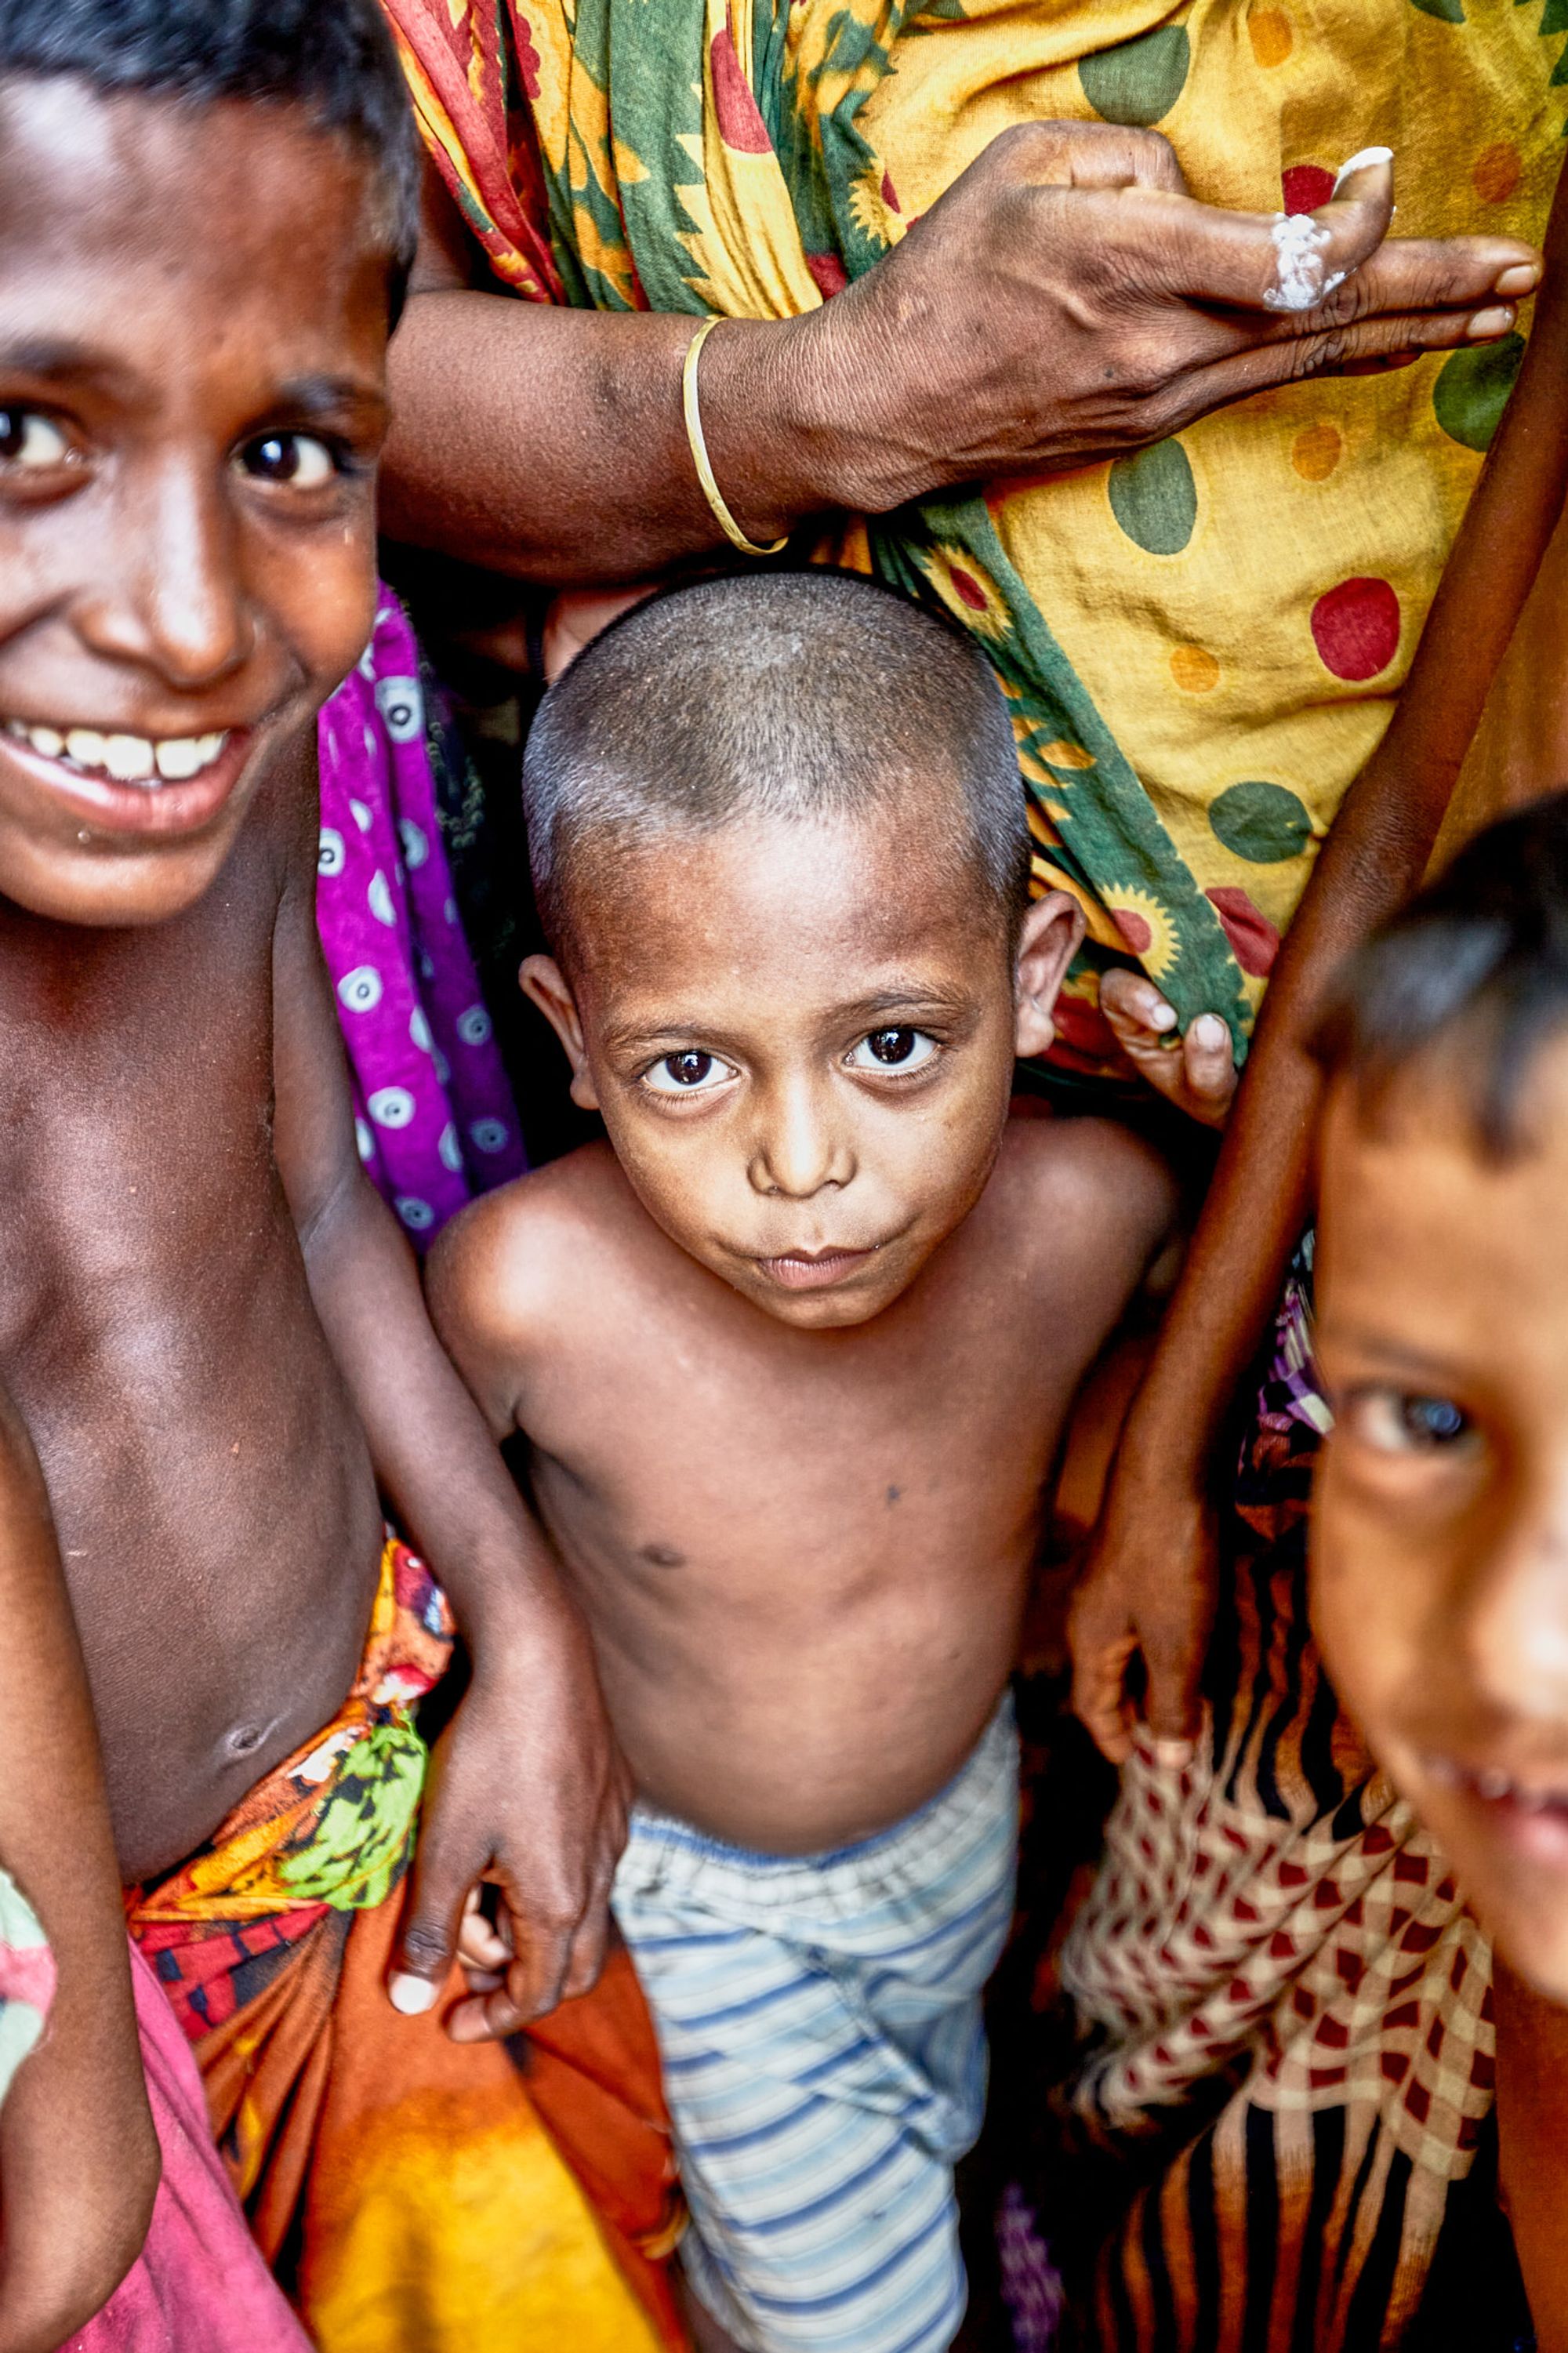 A group of children in rural Bangladesh 